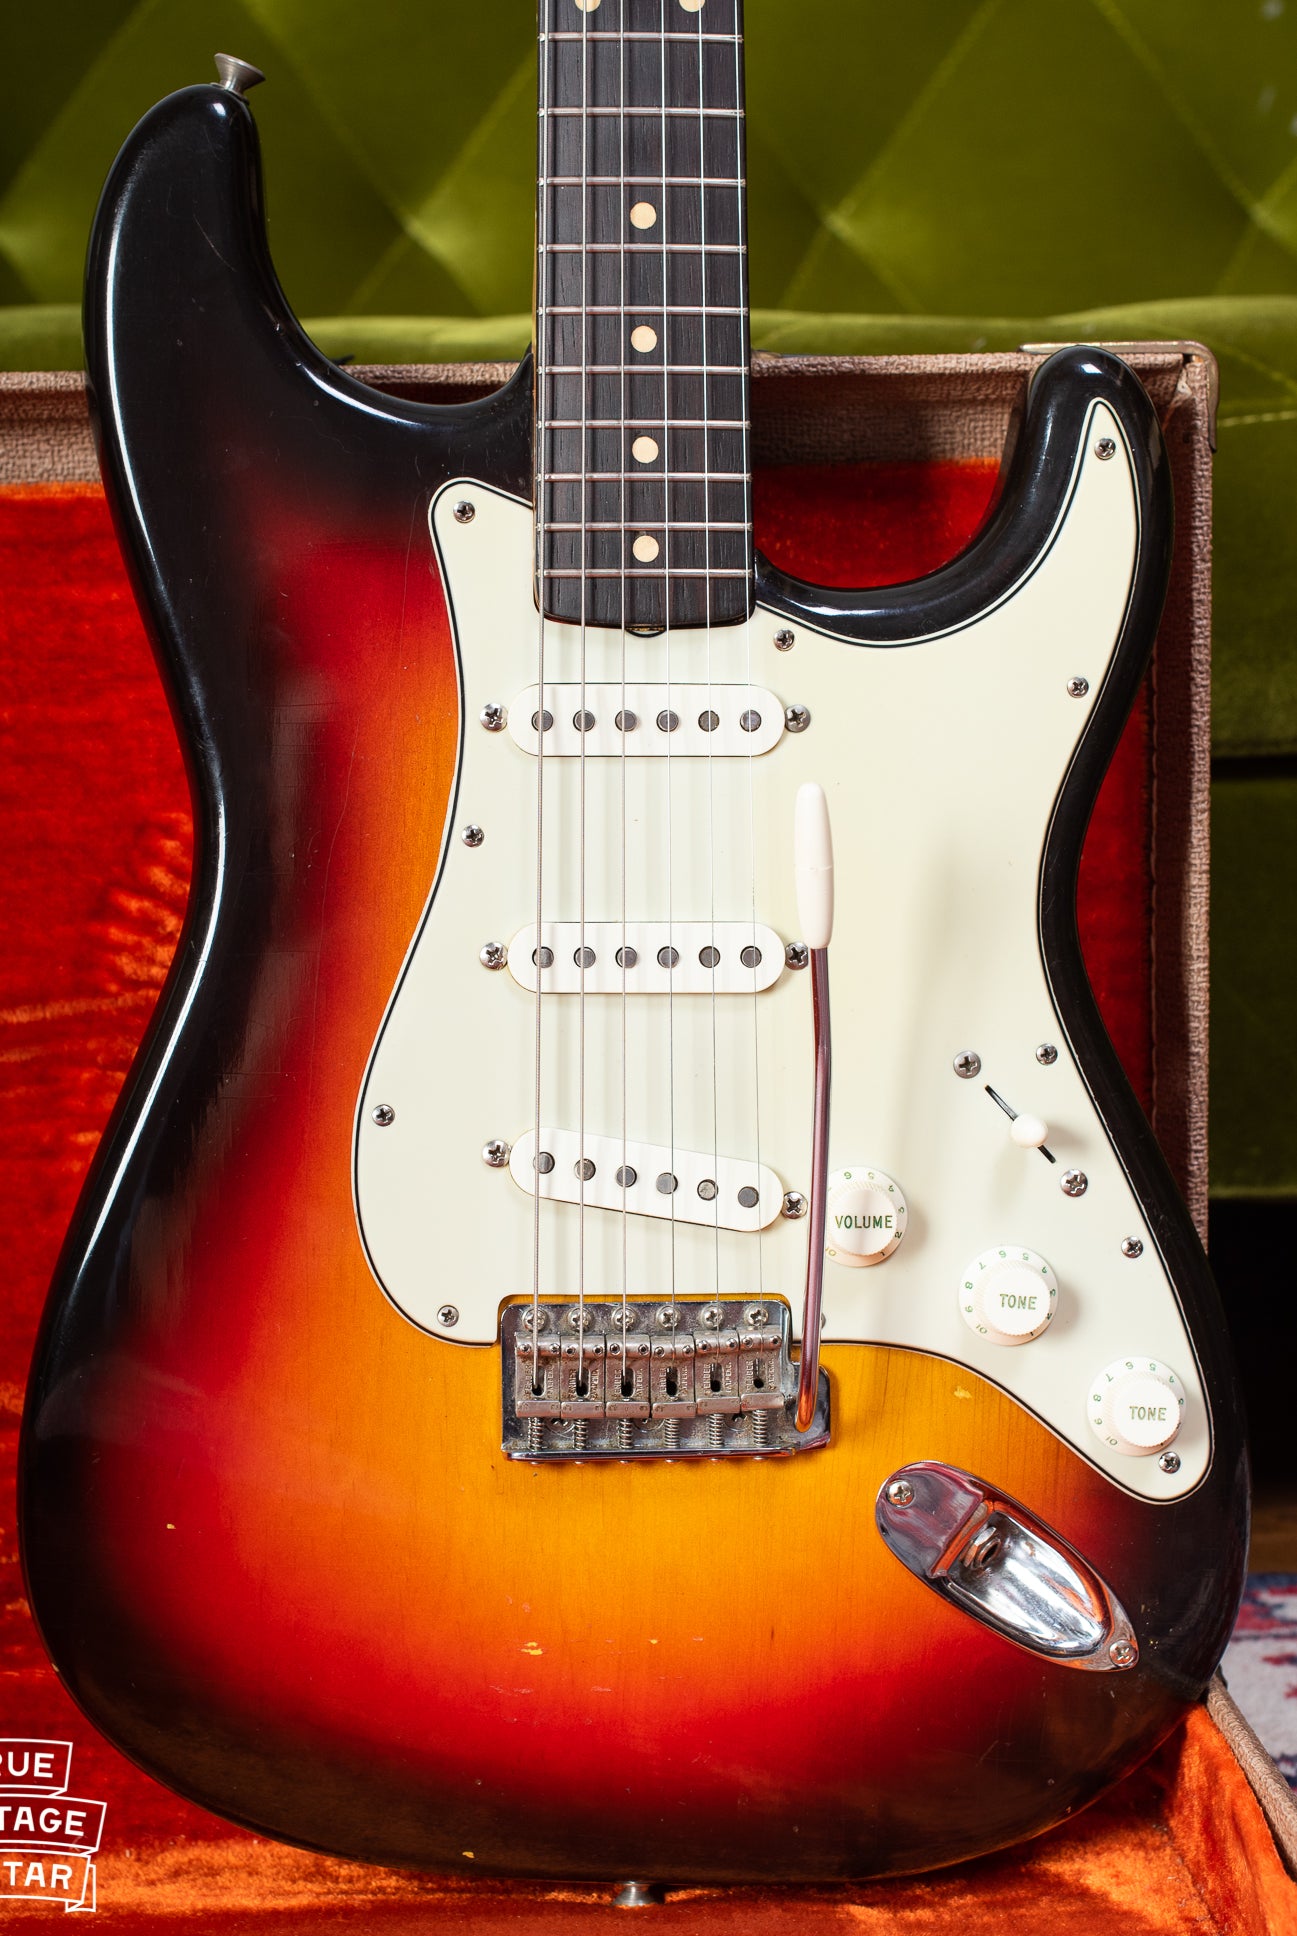 1962 Fender Stratocaster guitar, where to sell